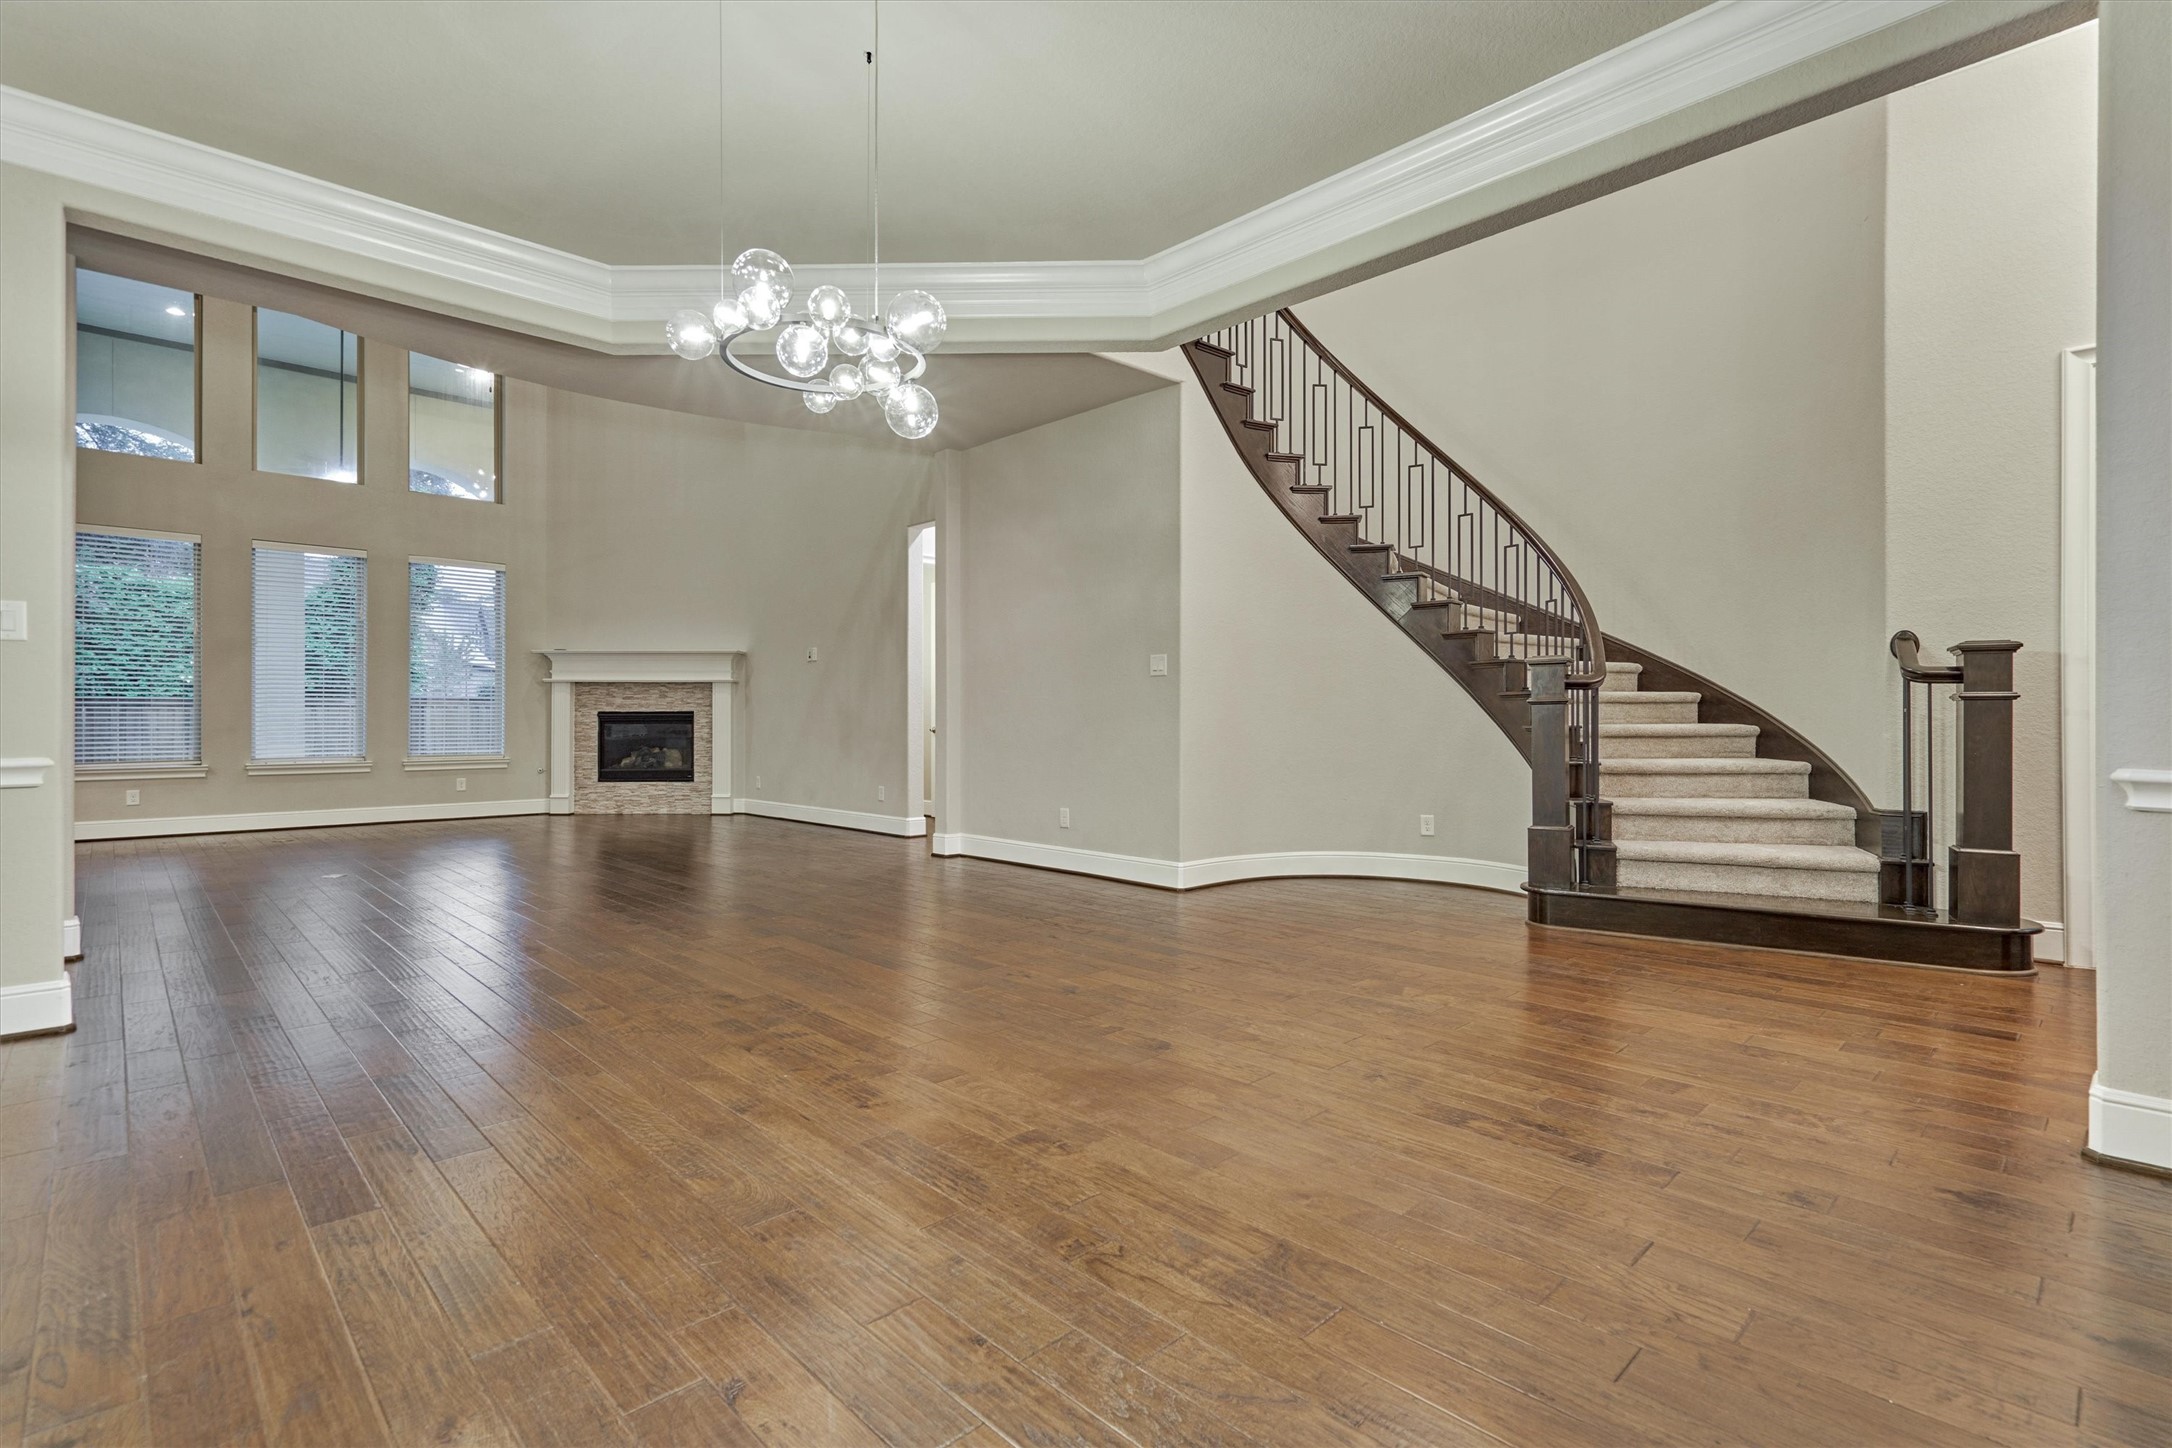 The bright and airy family room, featuring stunning two story windows and warm hardwood flooring.
